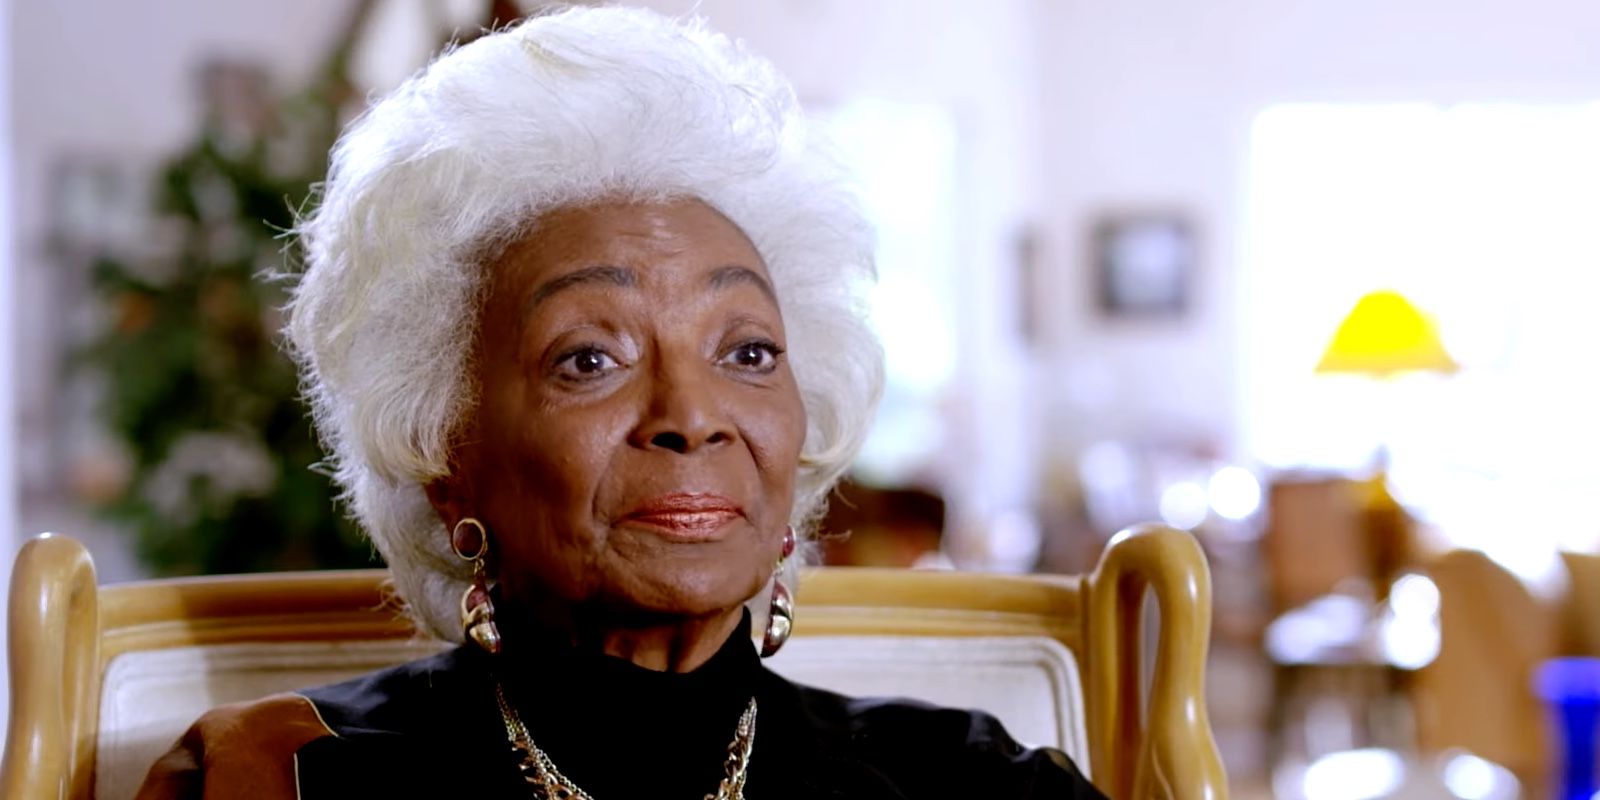 Nichelle Nichols: Net Worth, Age, Height & Everything You Need To Know About The Late Star Trek Actress